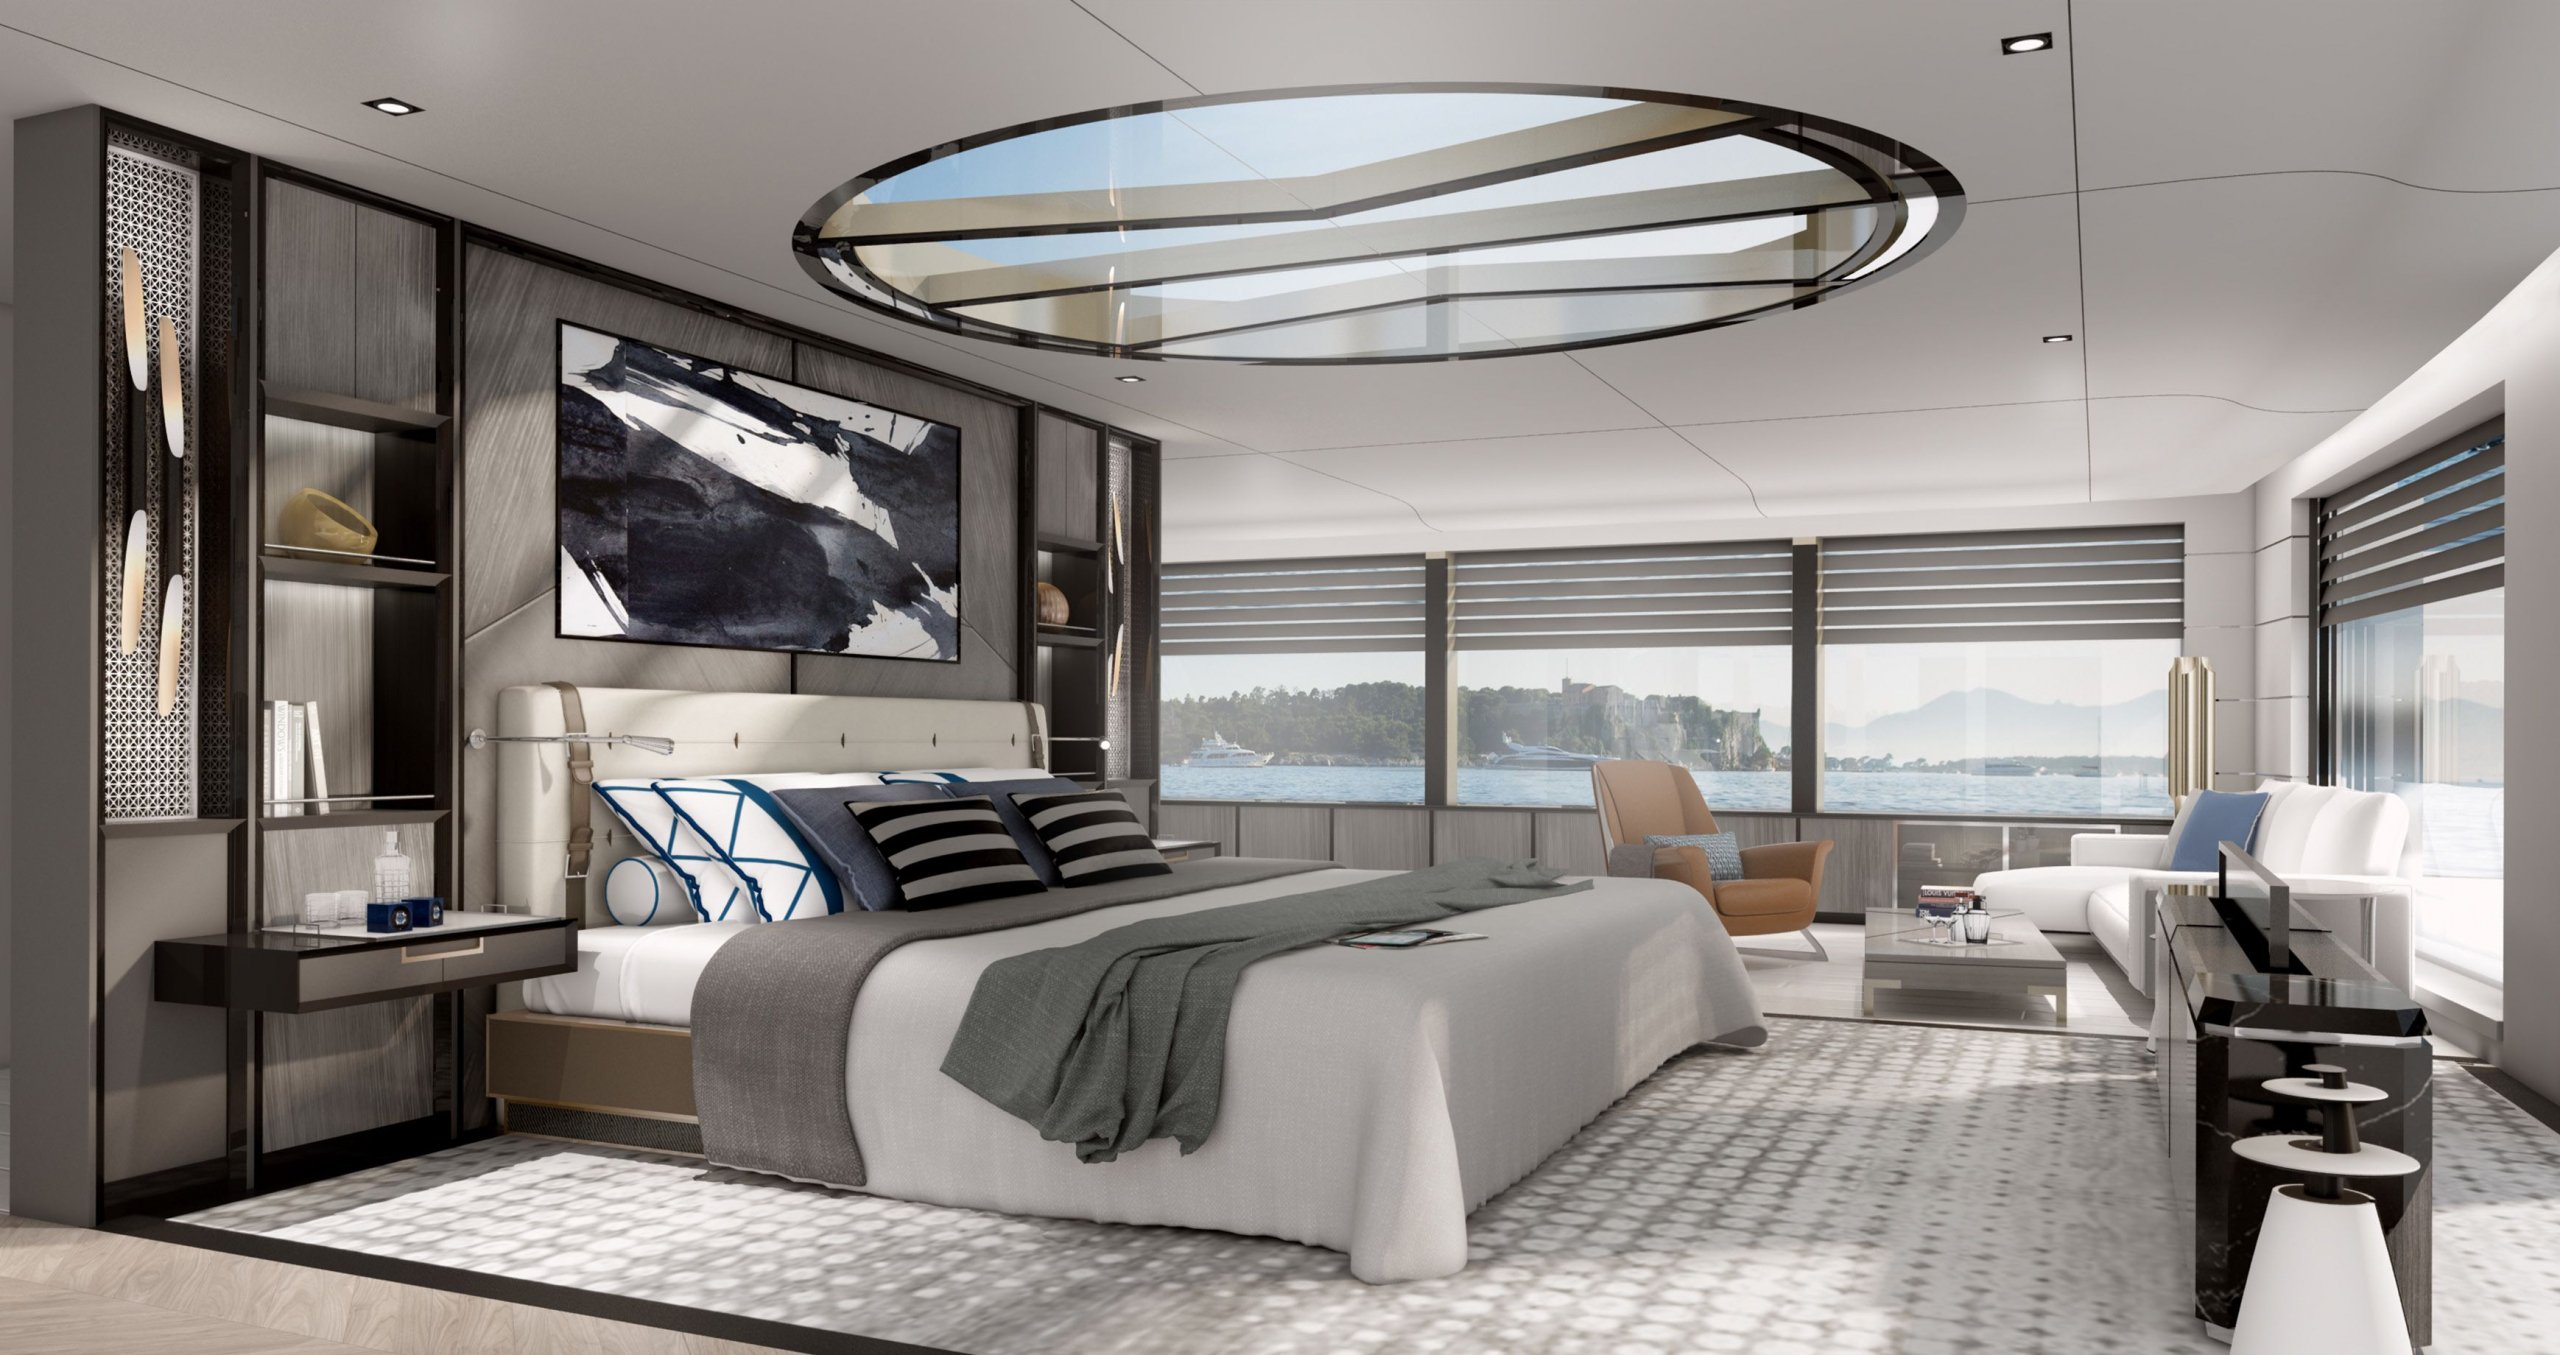 March and White yacht interior design